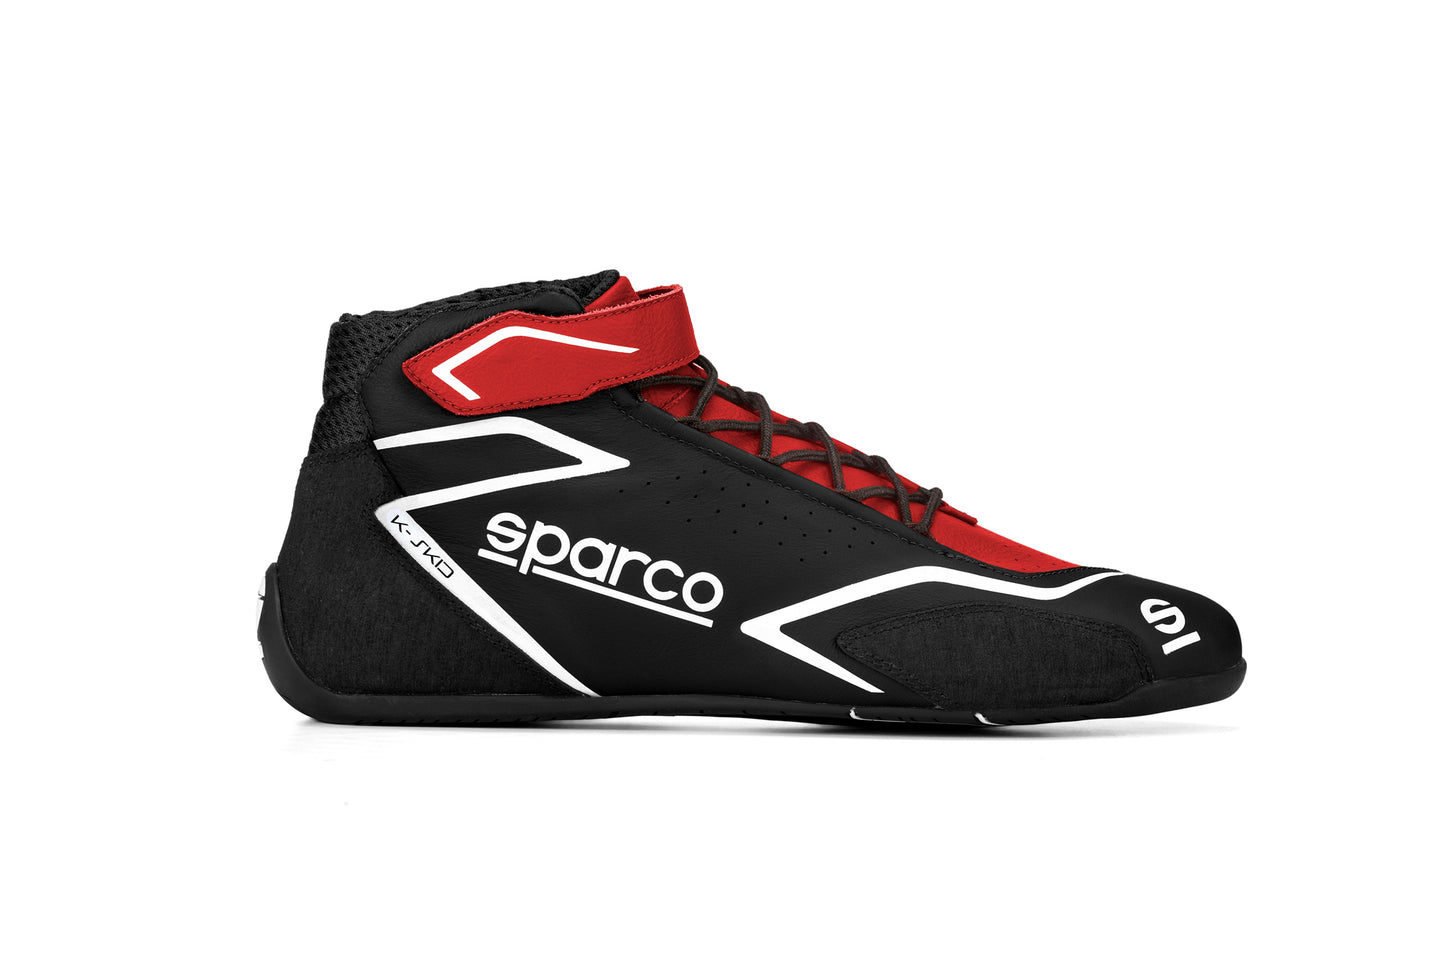 001277 Sparco K-Skid Kart Boots Karting Leather Lightweight All Sizes EU 35-48